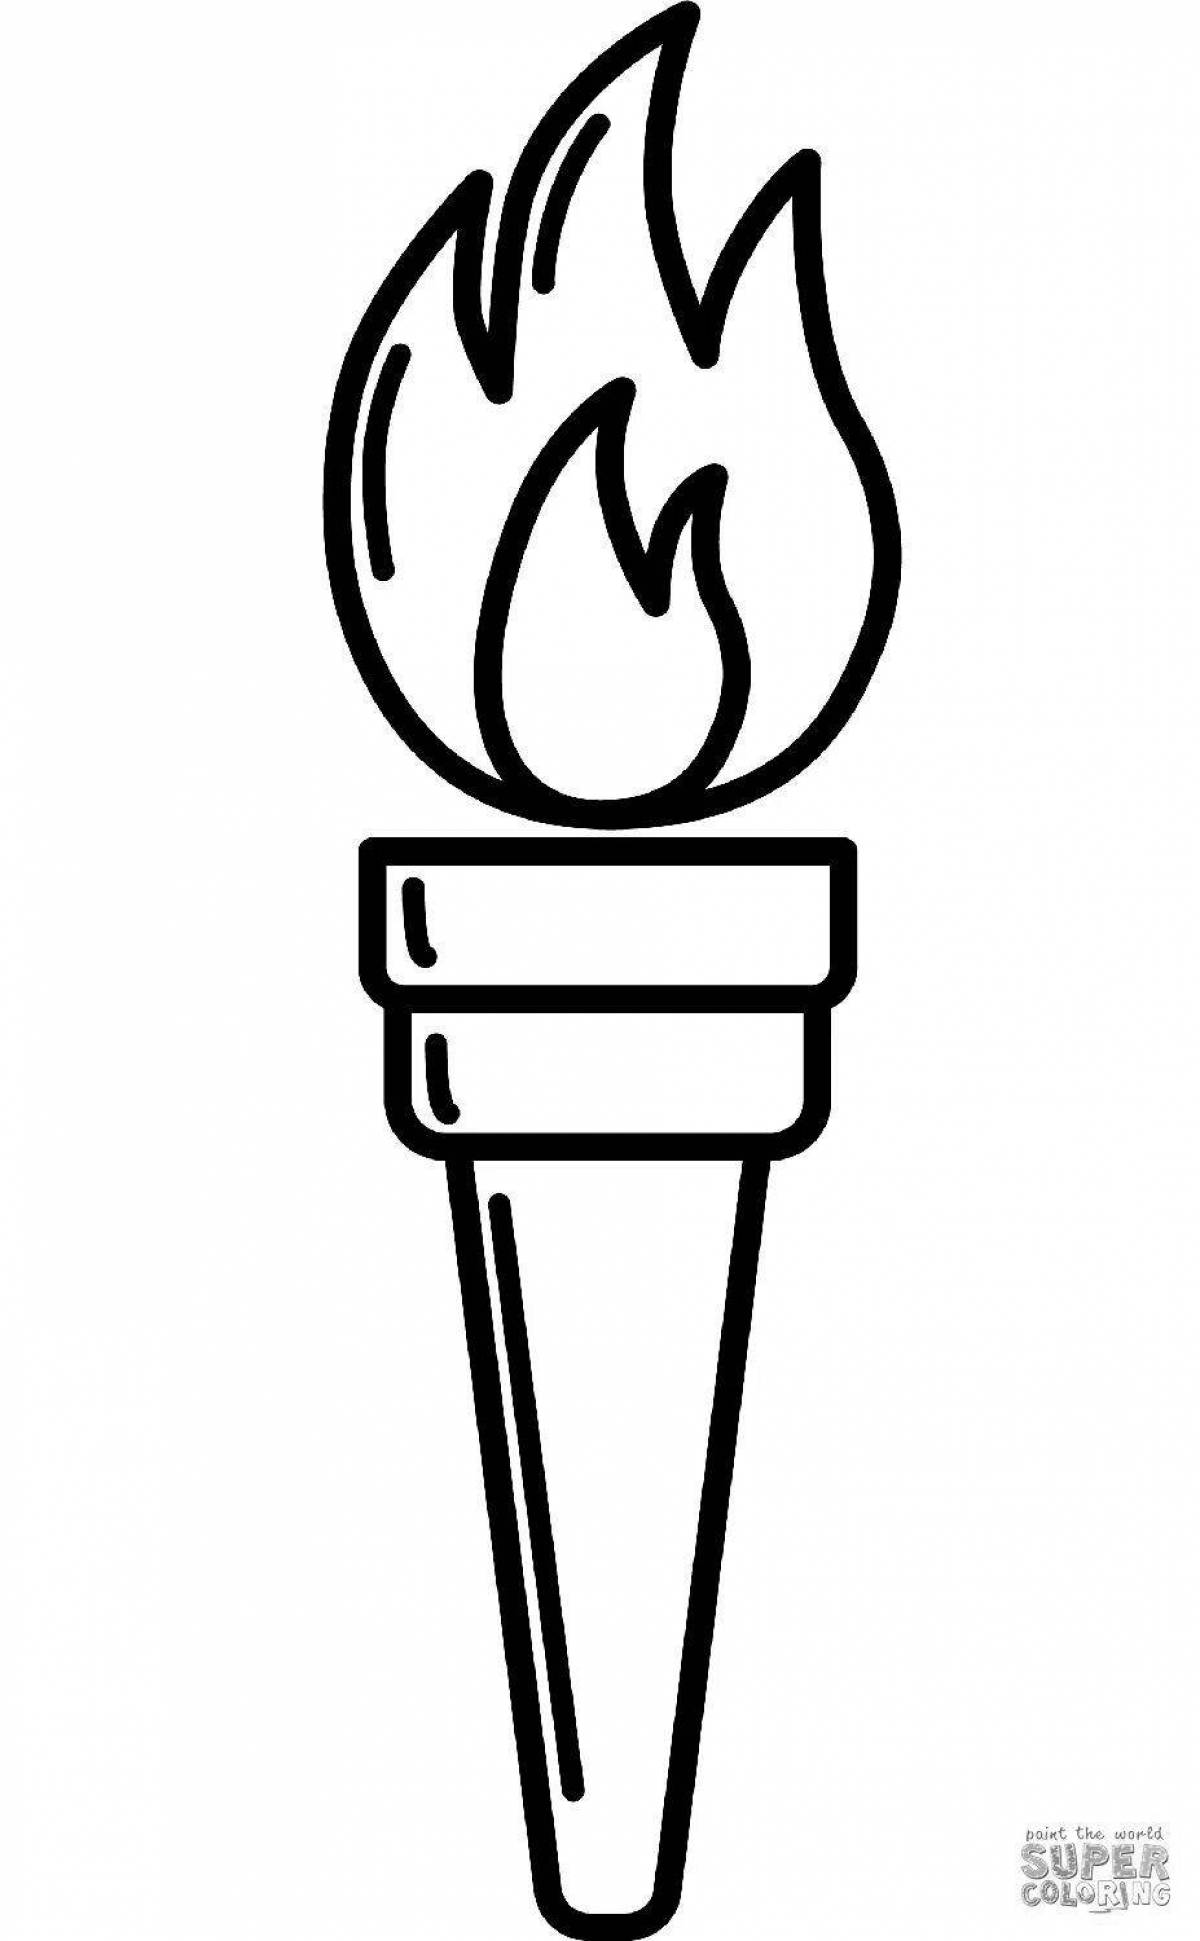 Olympic torch #3